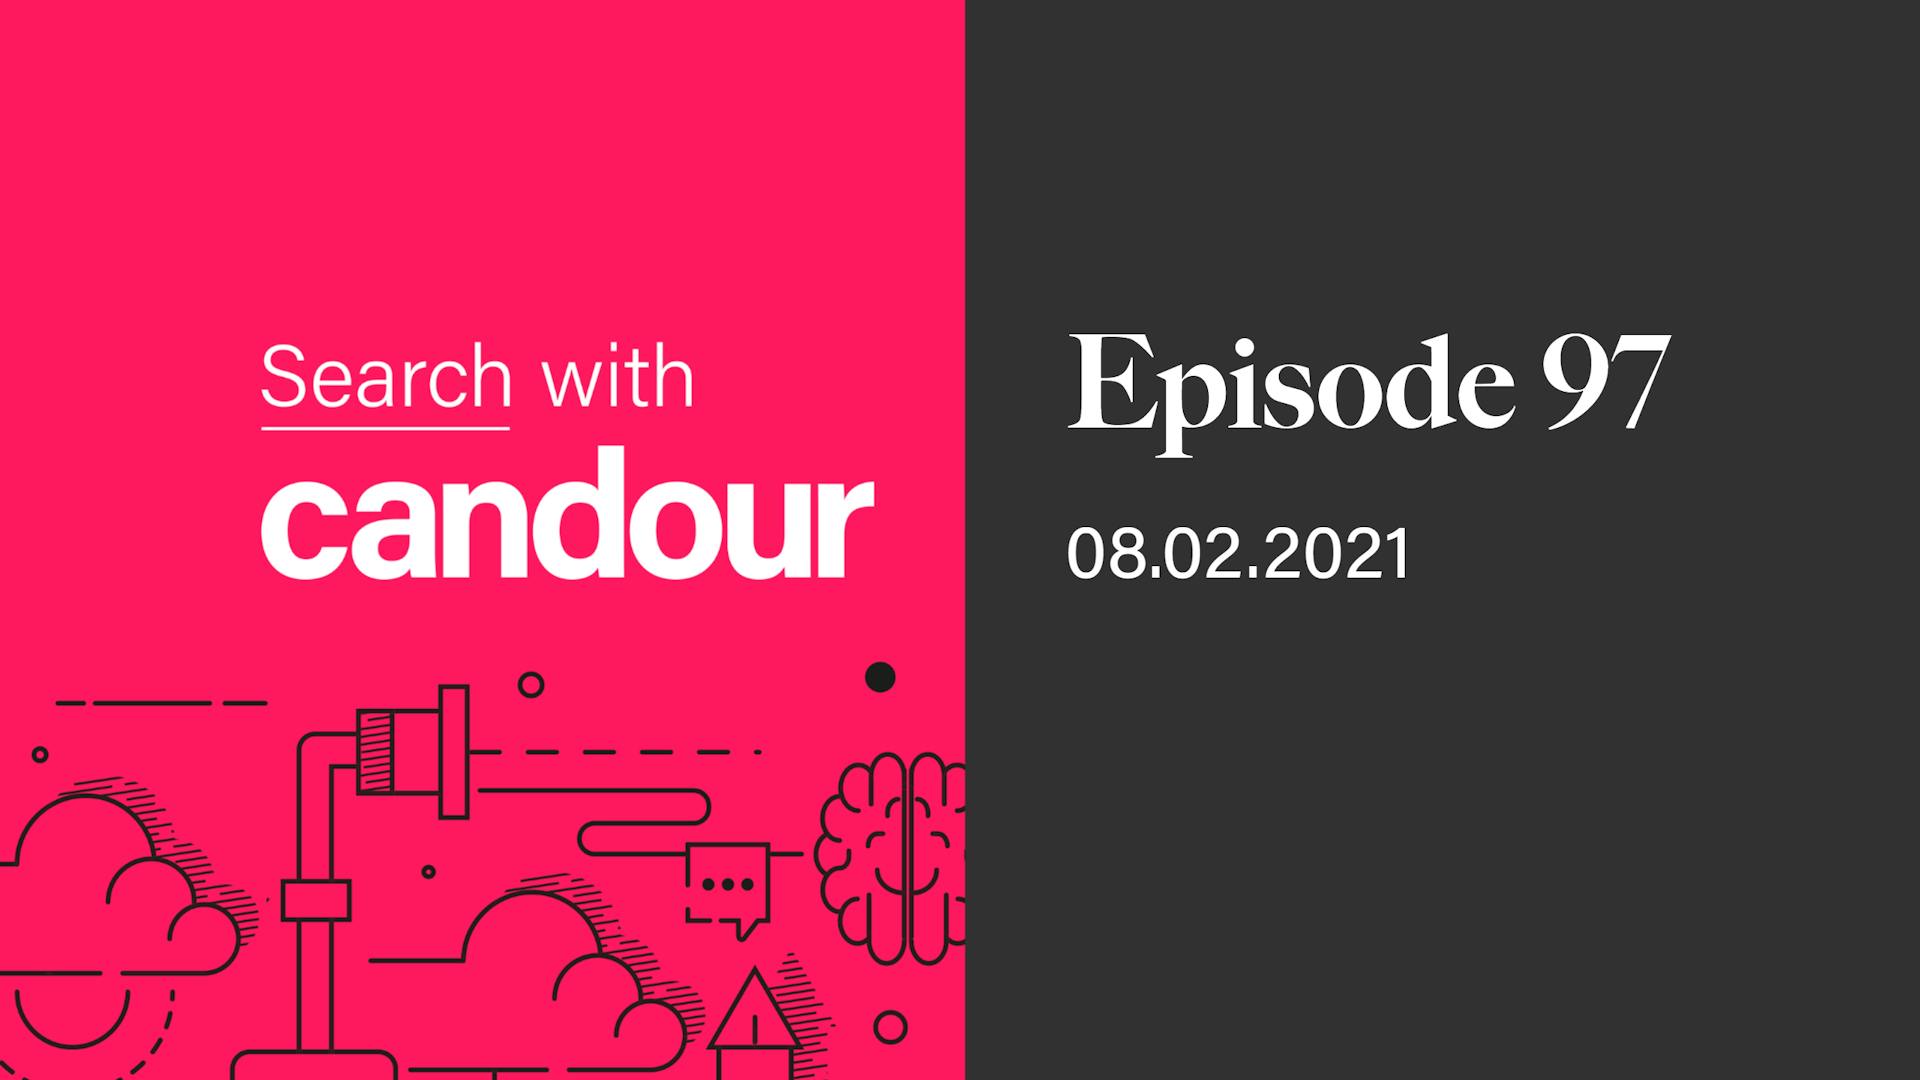 Episode 97 - Search with Candour